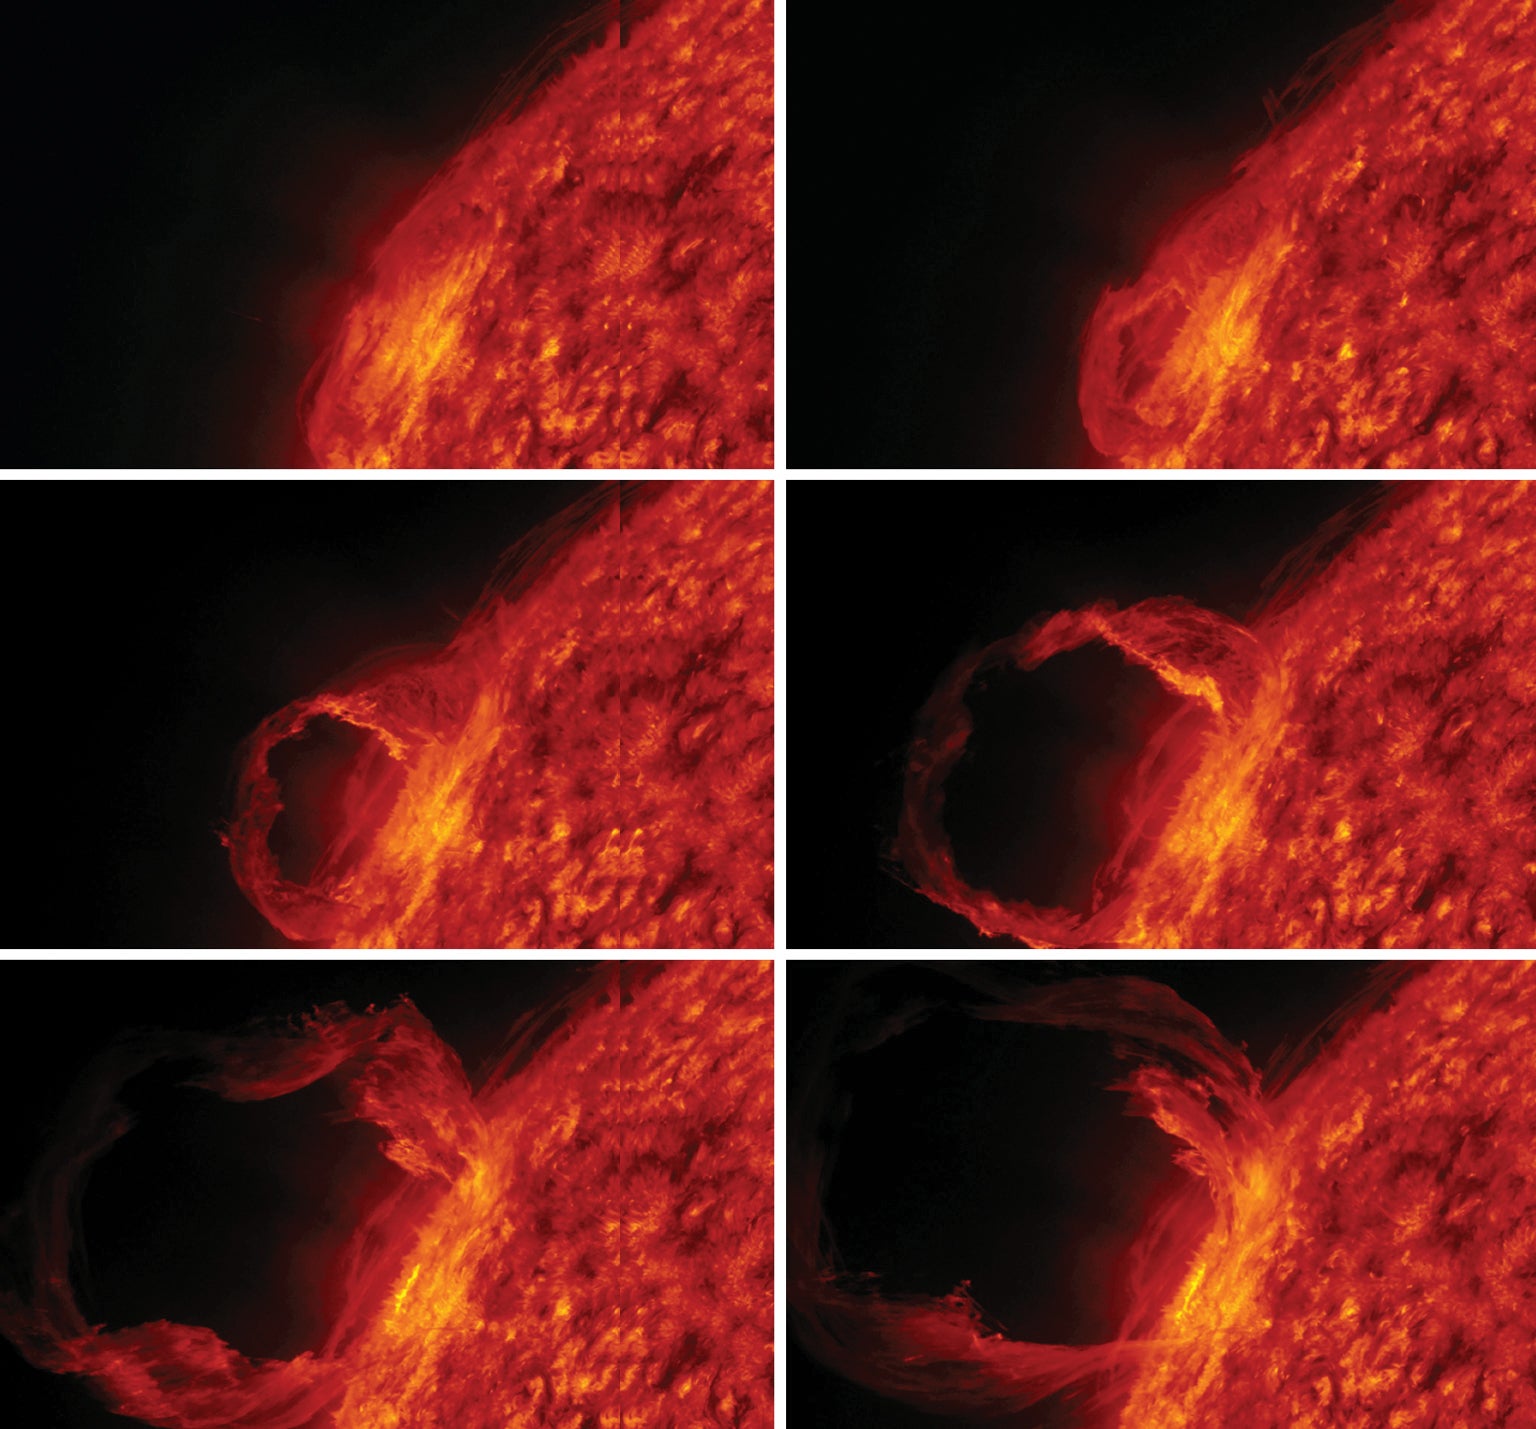 A planet-dwarfing solar prominence erupts from our star, unleashing massive amounts of matter and radiation.